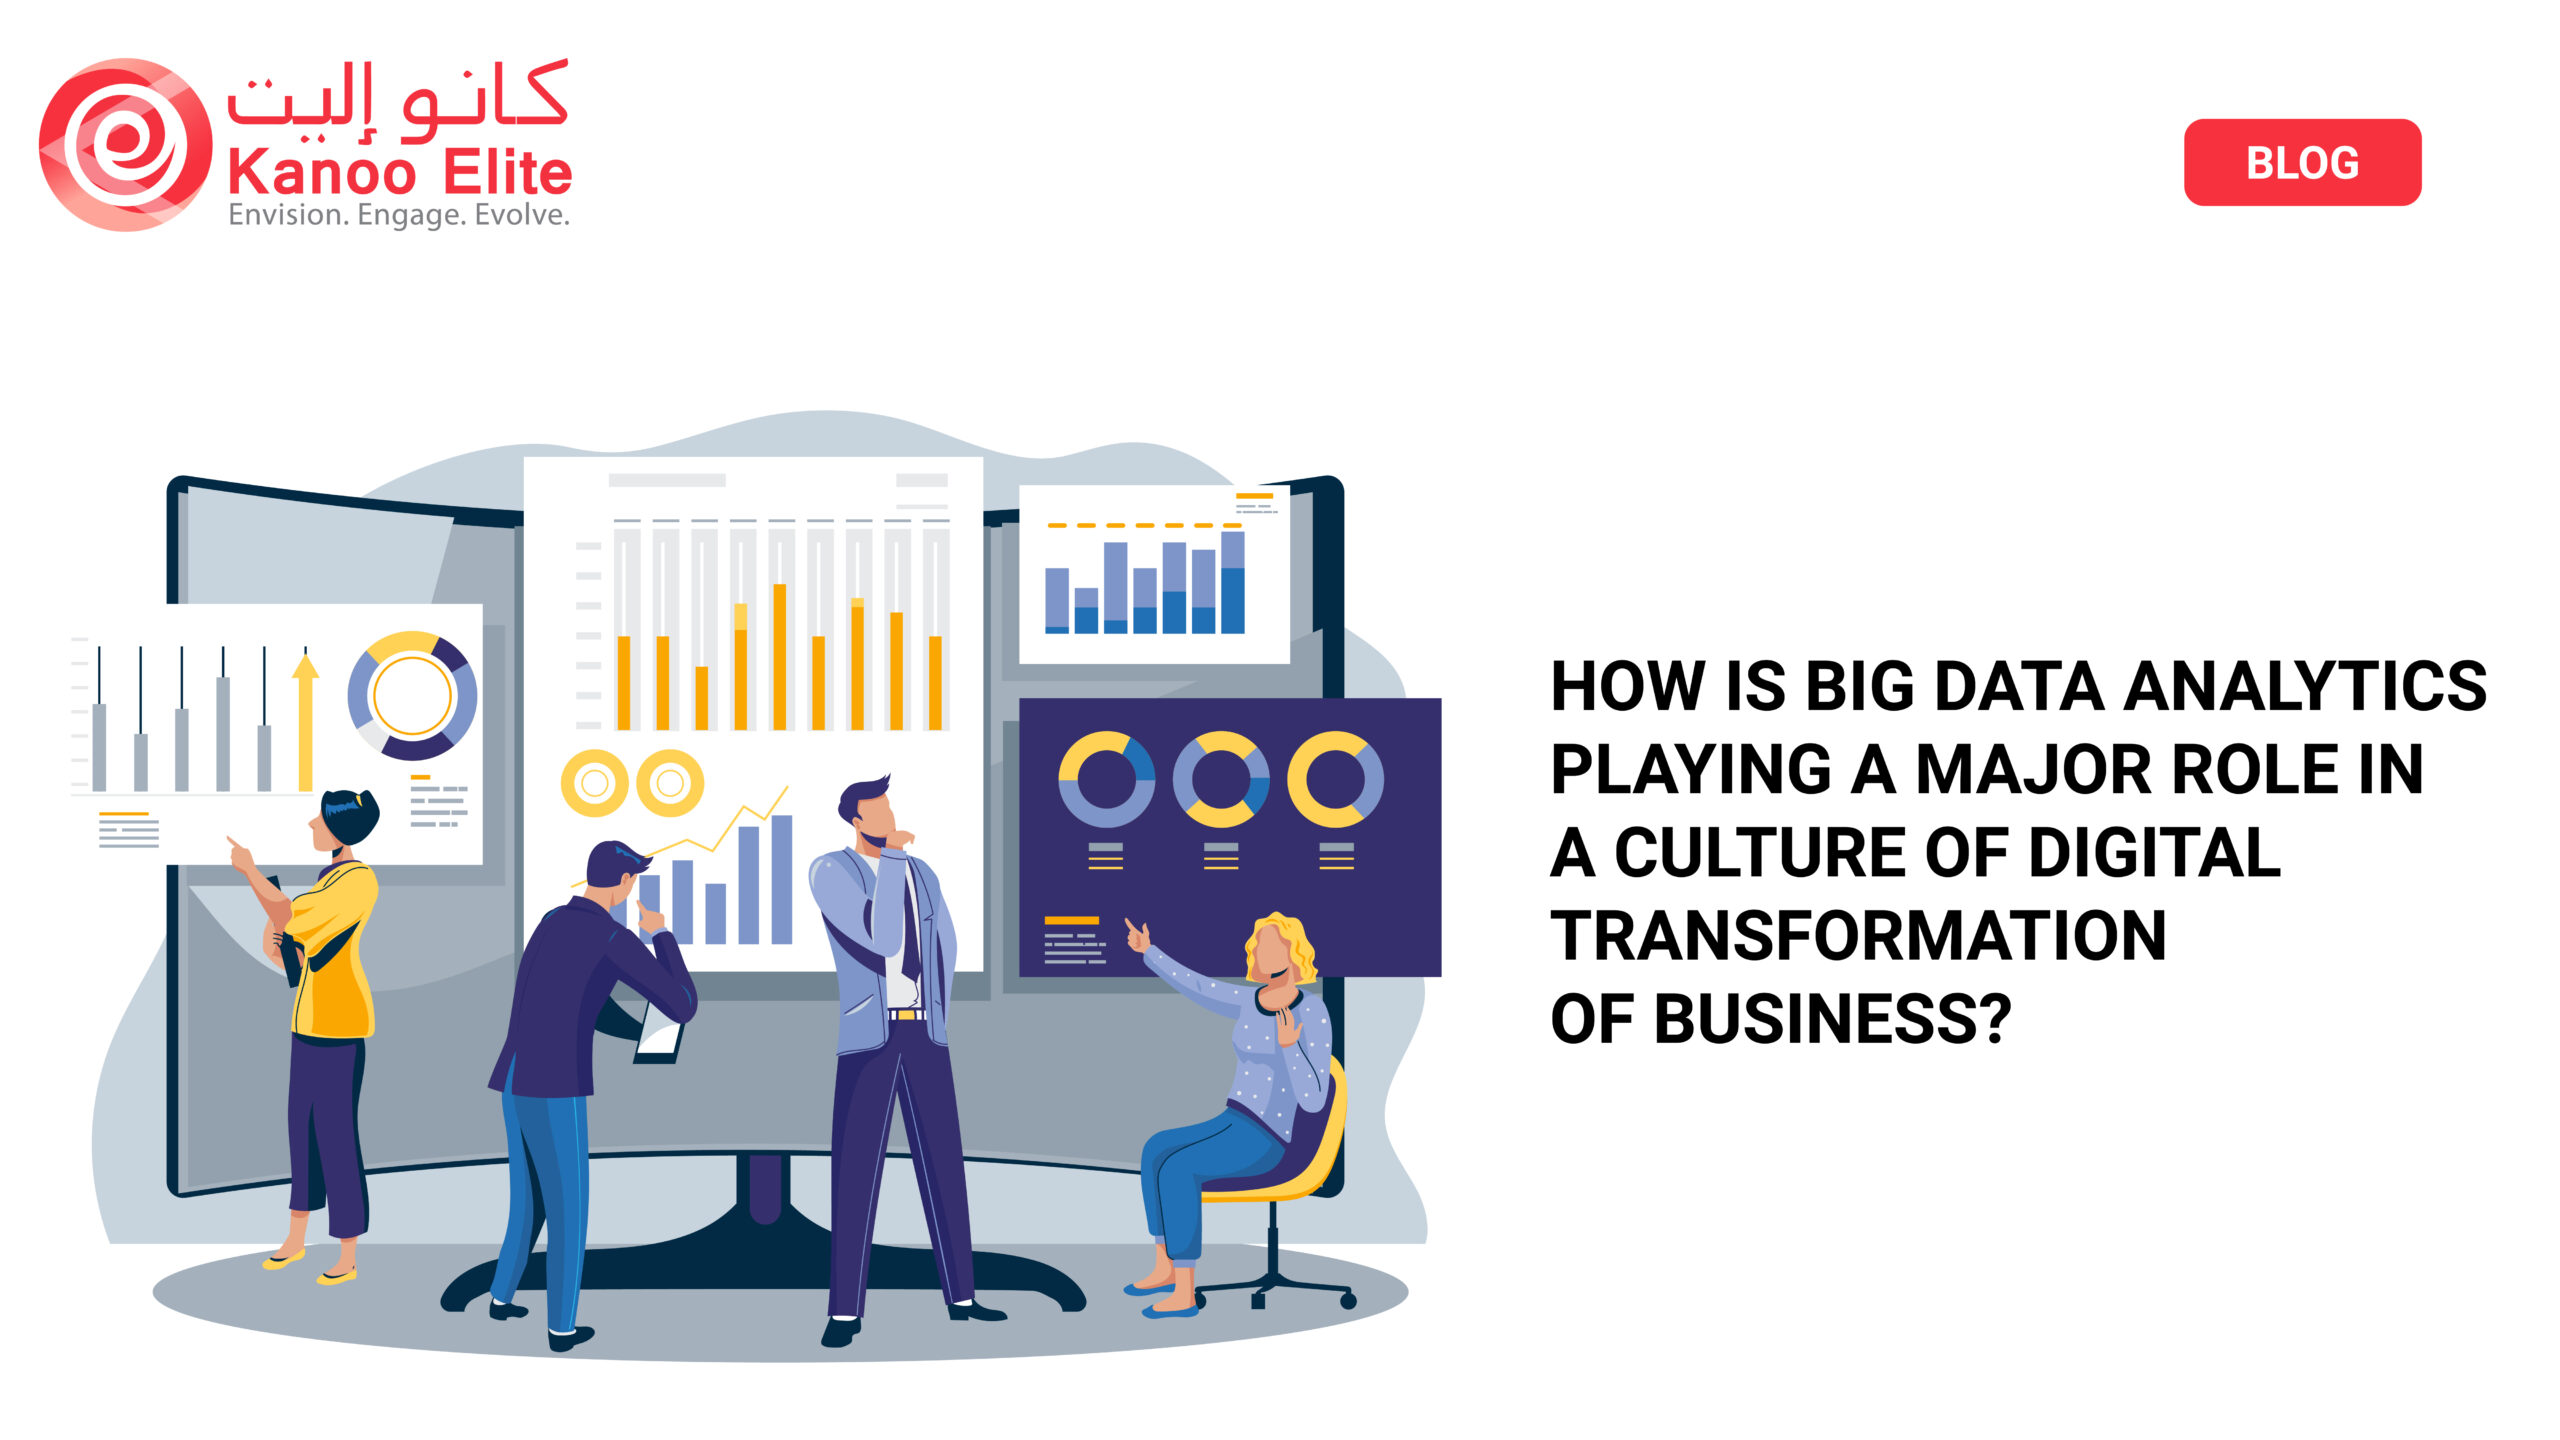 <strong>How is Big Data Analytics Playing a Major Role in a Culture of Digital Transformation of Business?</strong>